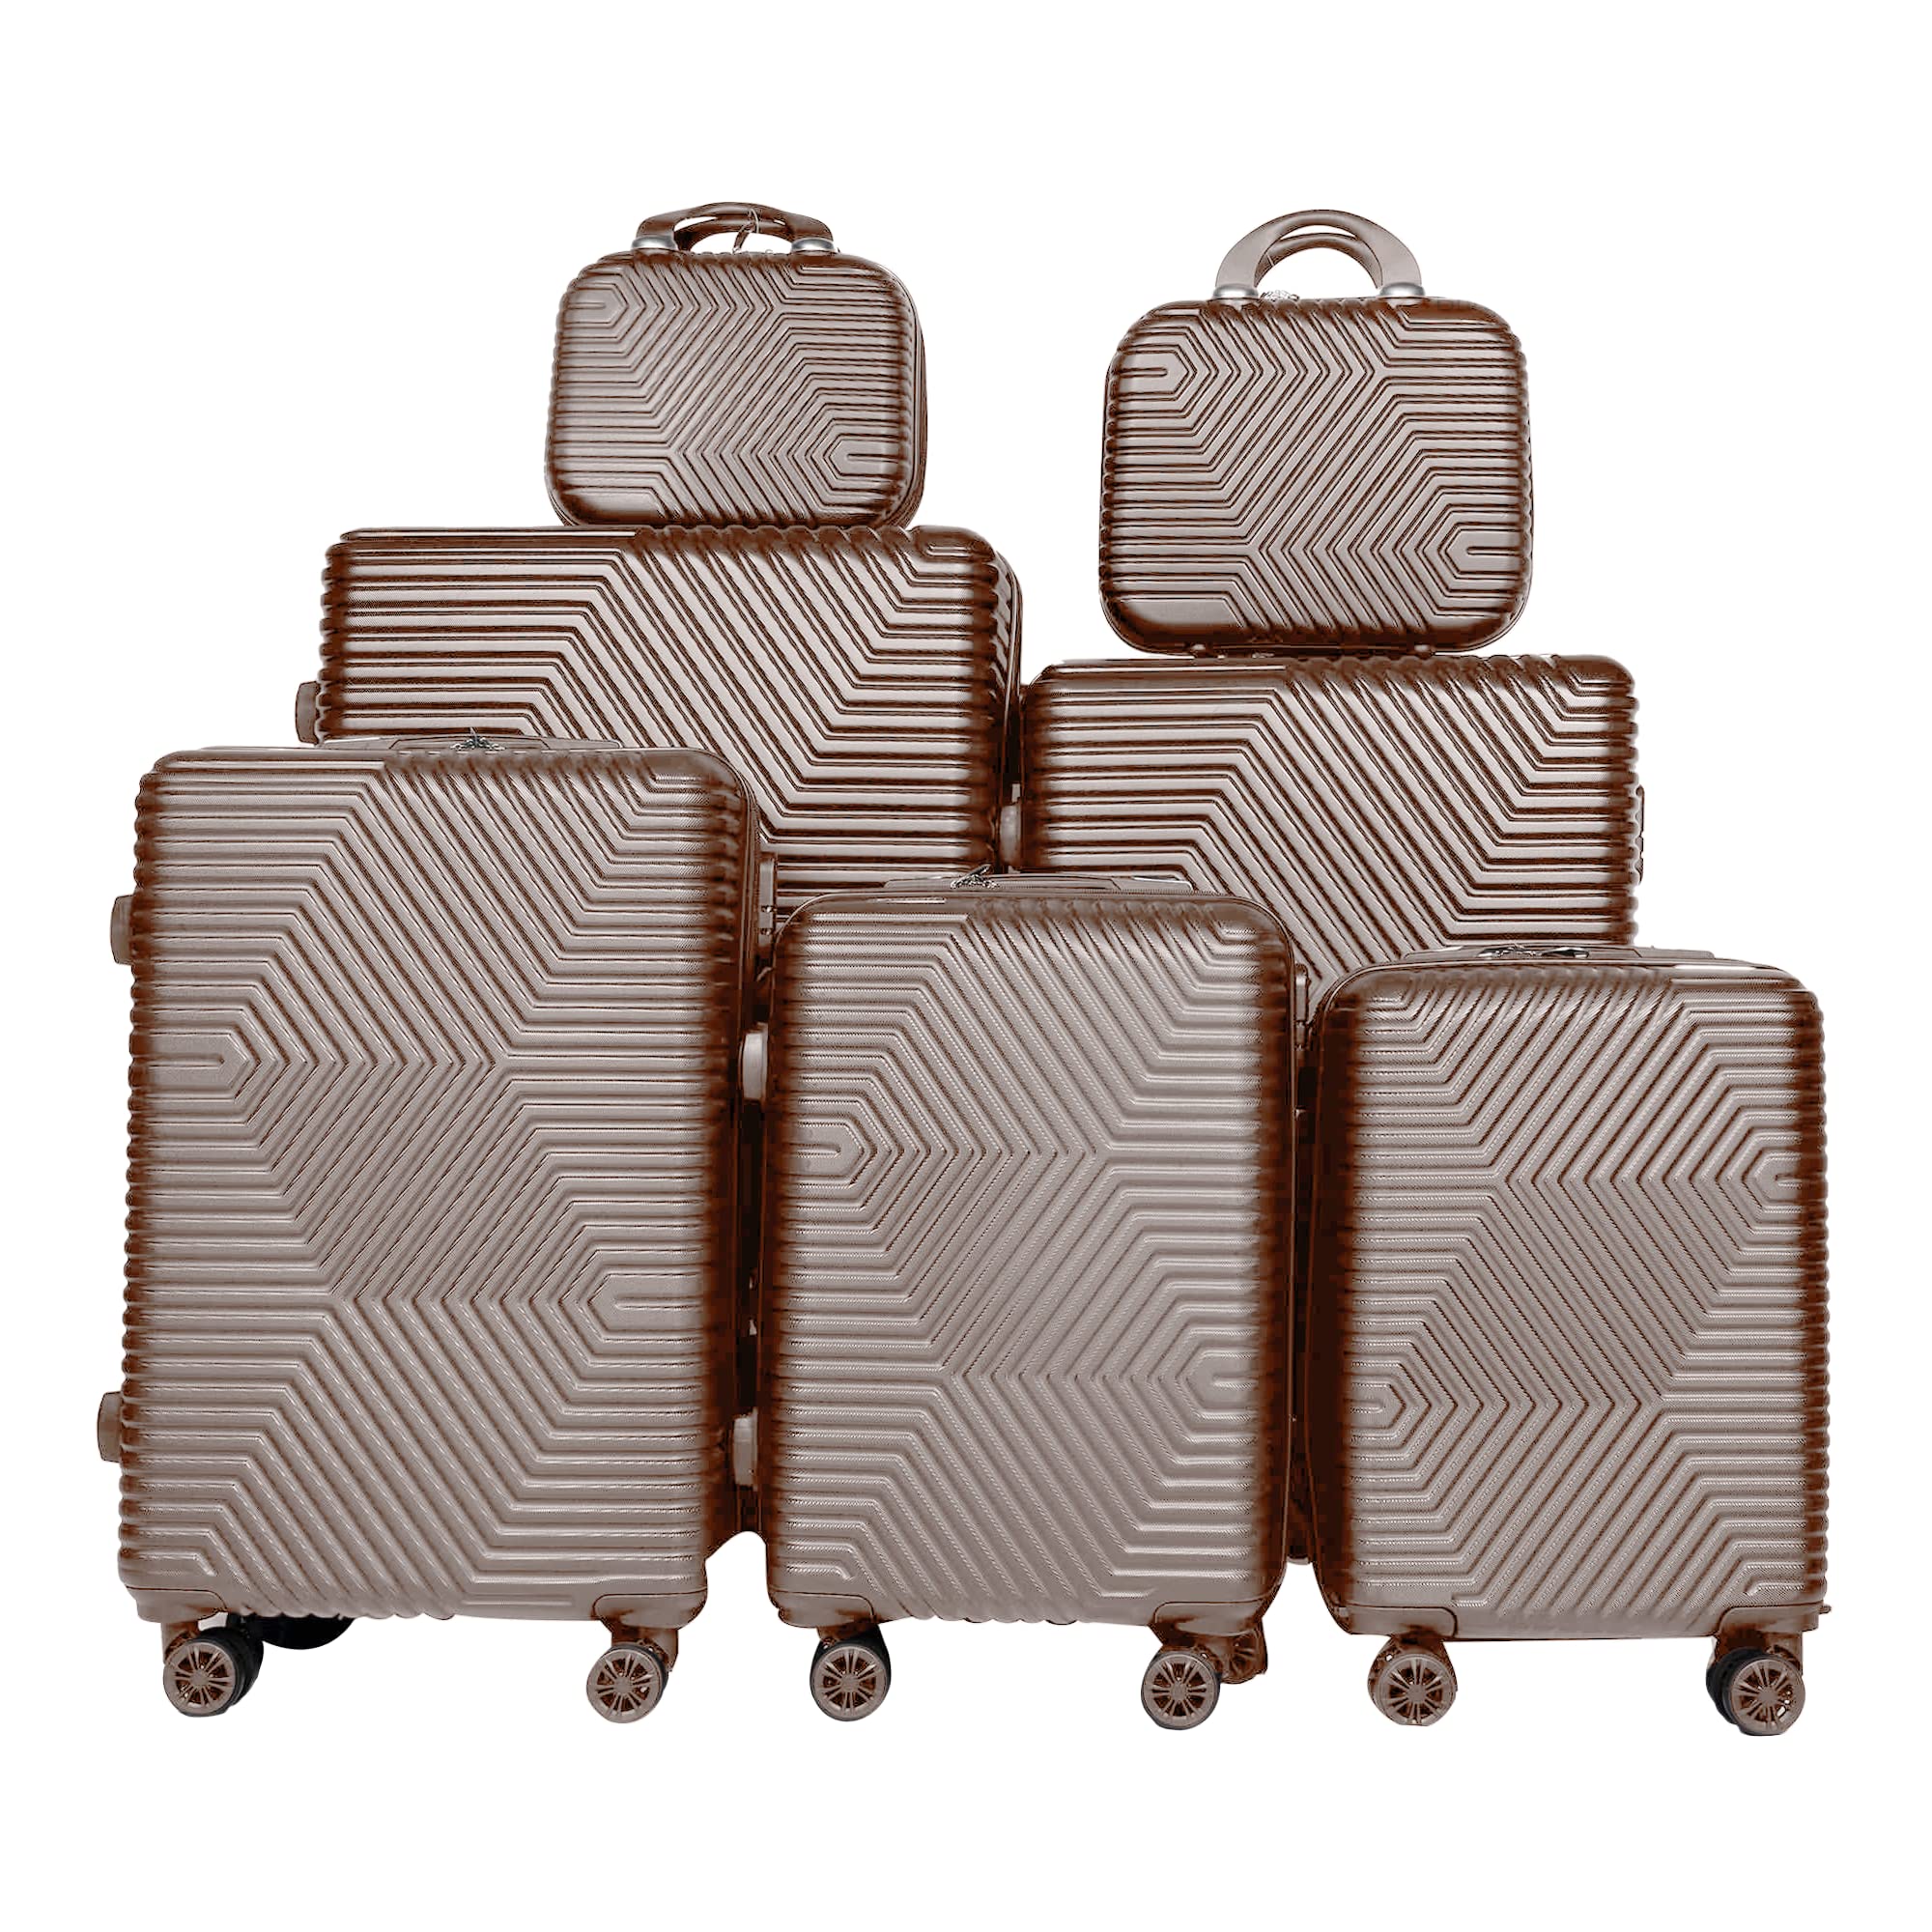 Pigeon ABS Hard-shell Zig Zag Design Trolley - Set of 7 [32, 28, 24, 20, 18, 14, 12inch]